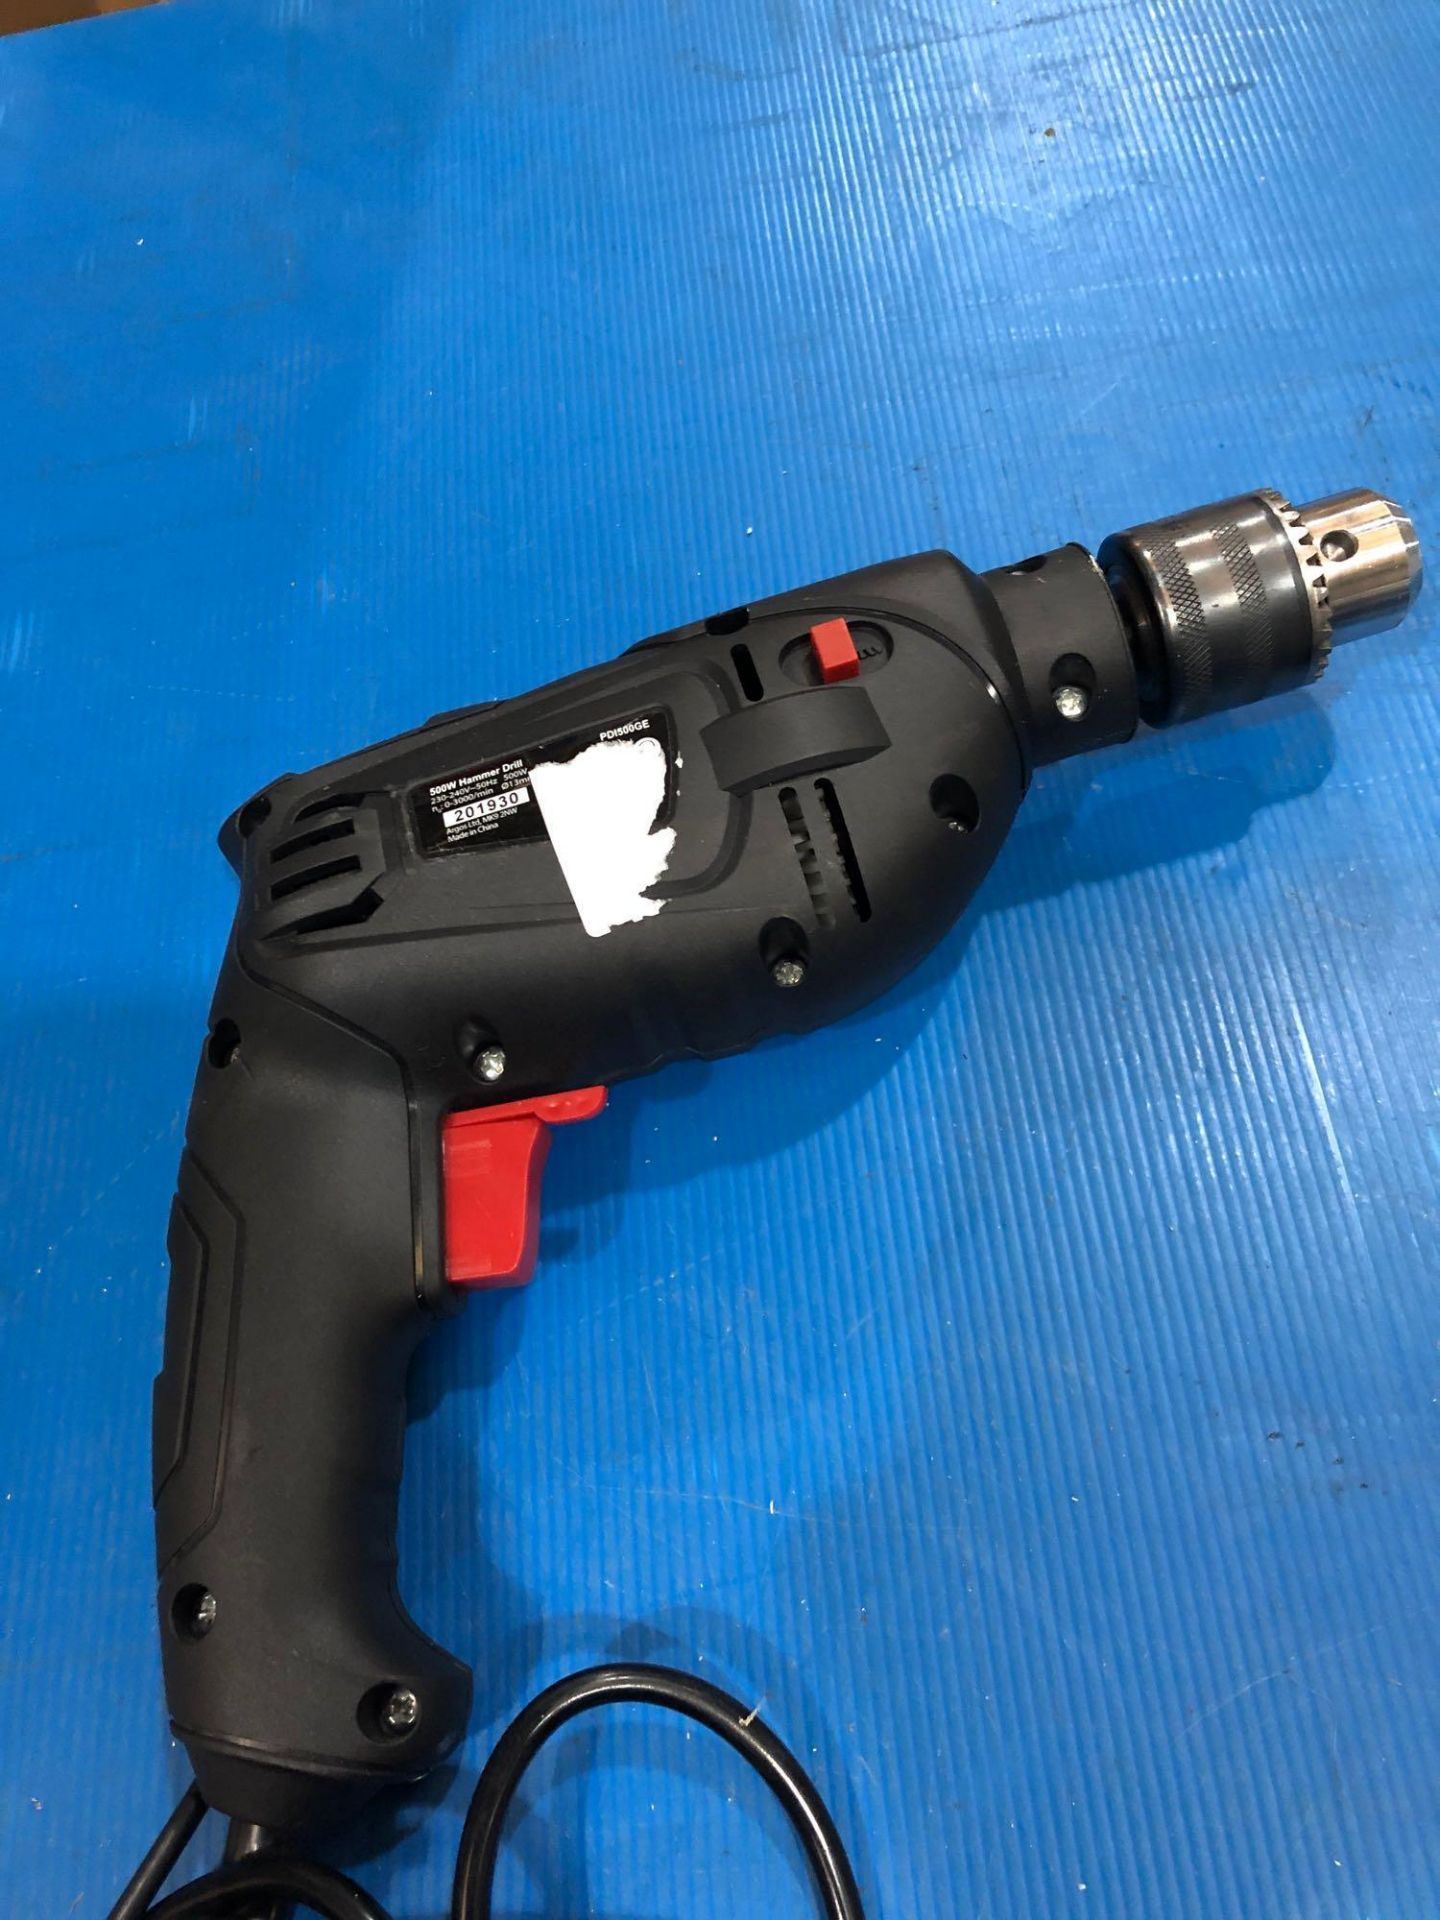 Simple Value Corded Hammer Drill - 500W PDI500GE £12.00 RRP - Image 2 of 4